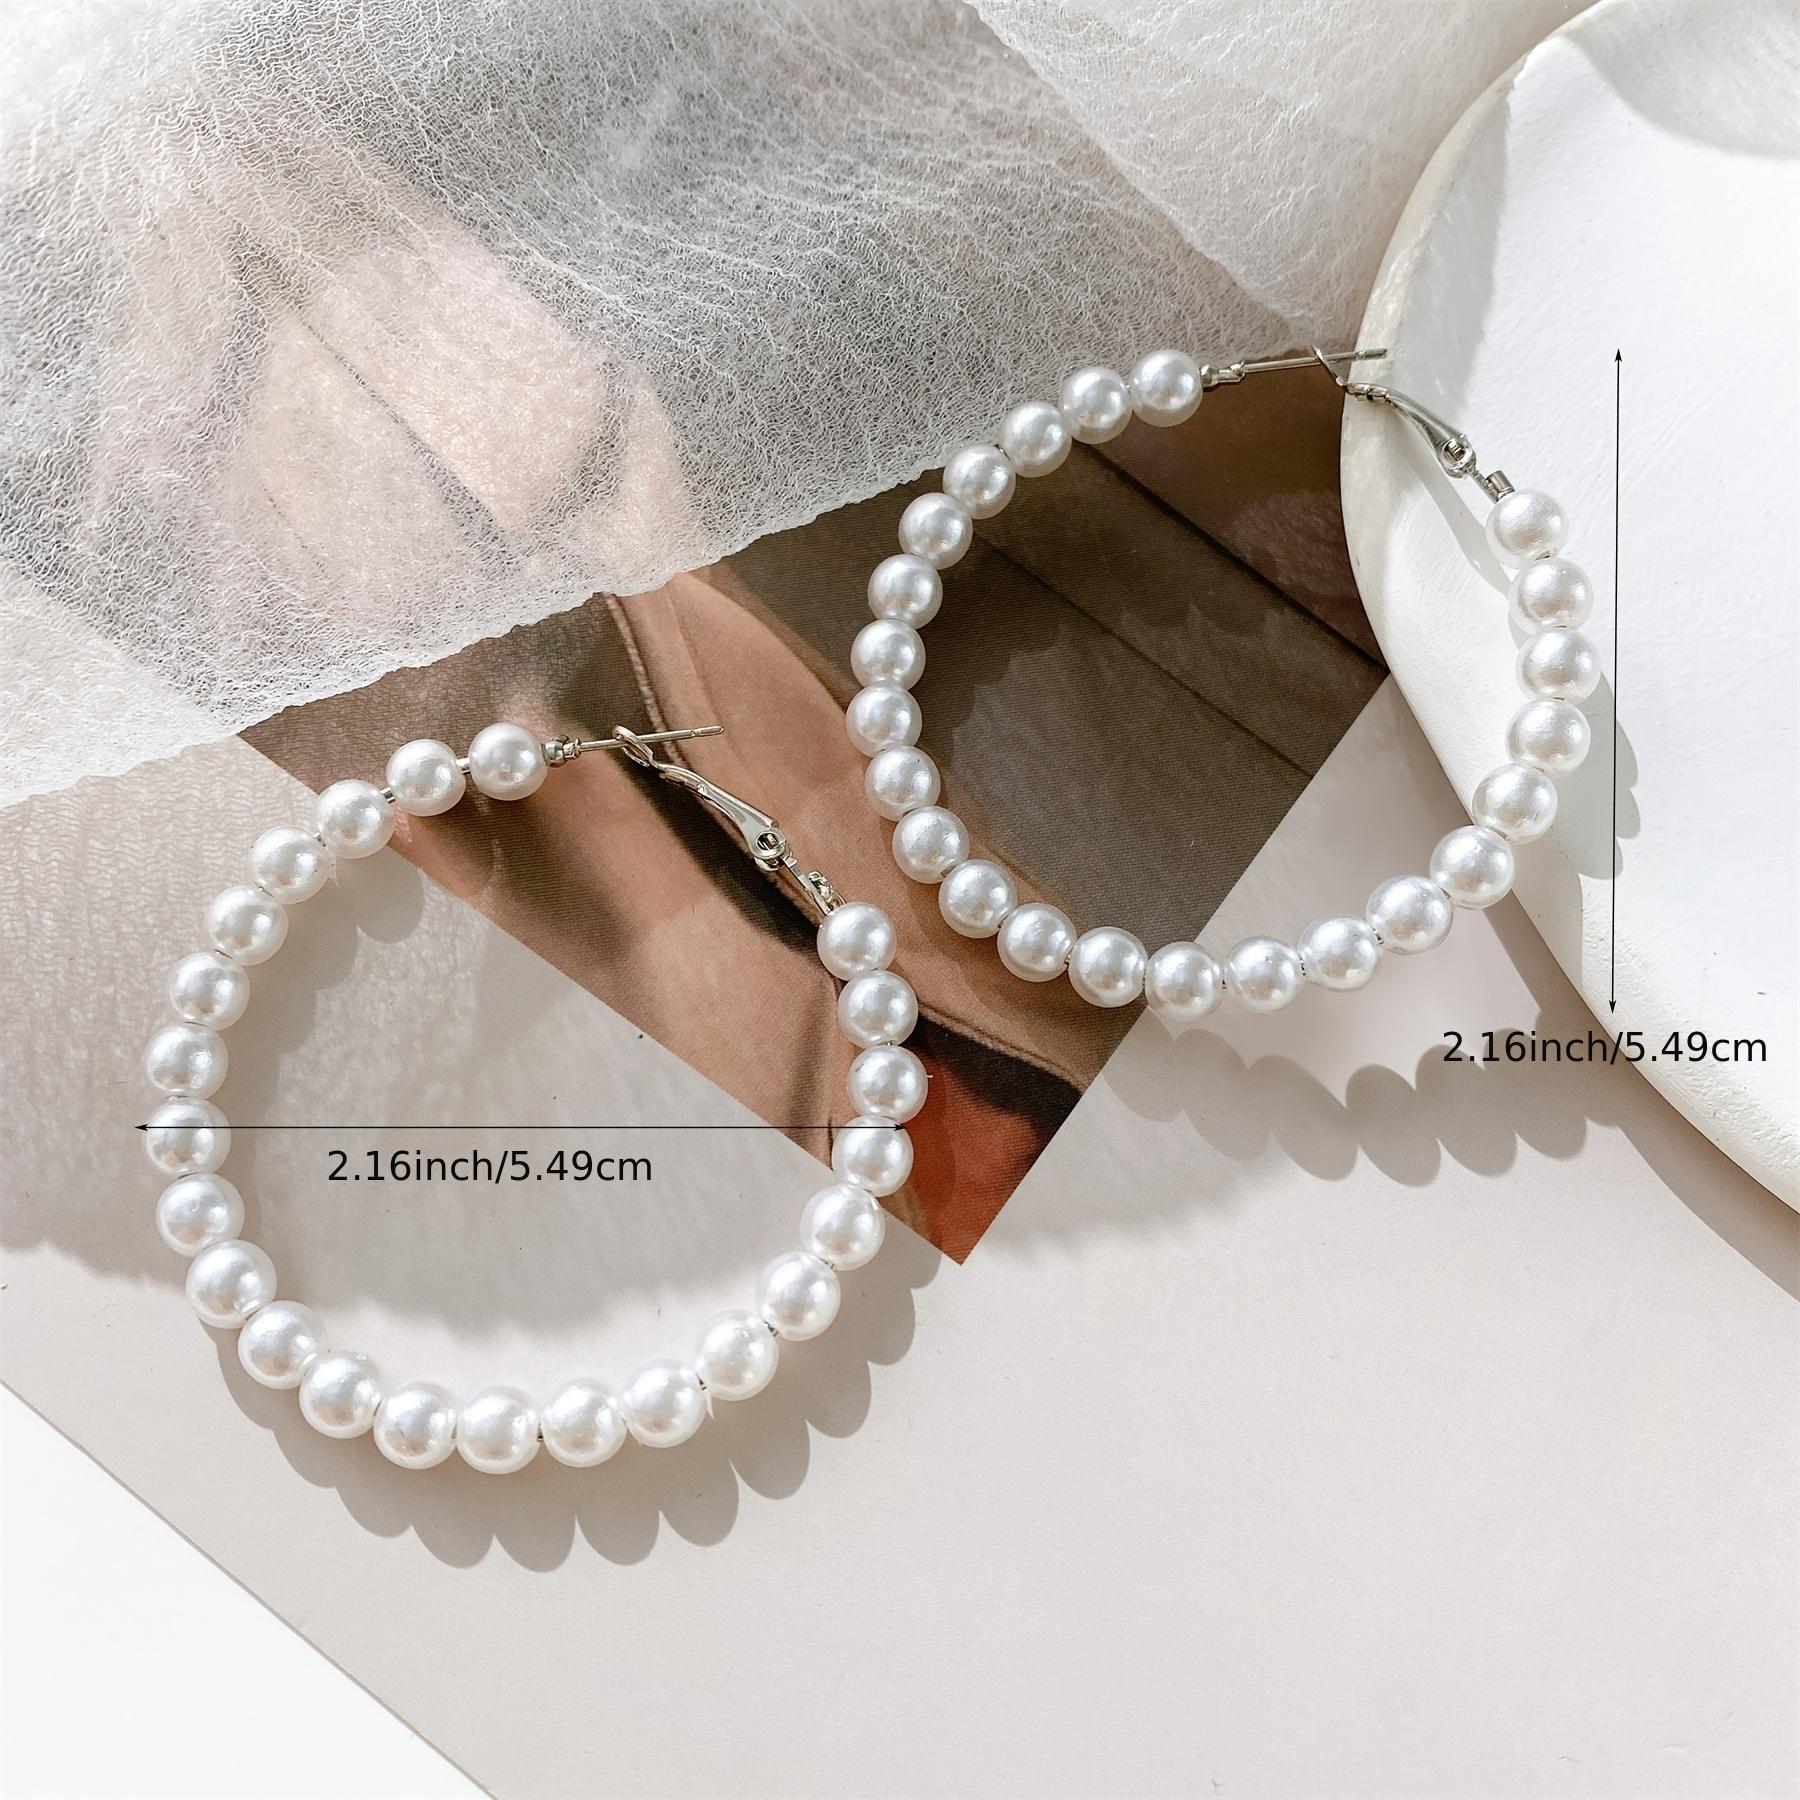 Upgrade Your Style with Our Alluring Allover Pearl Hoop Earrings - Women's Fashion Accessories 2023 New In